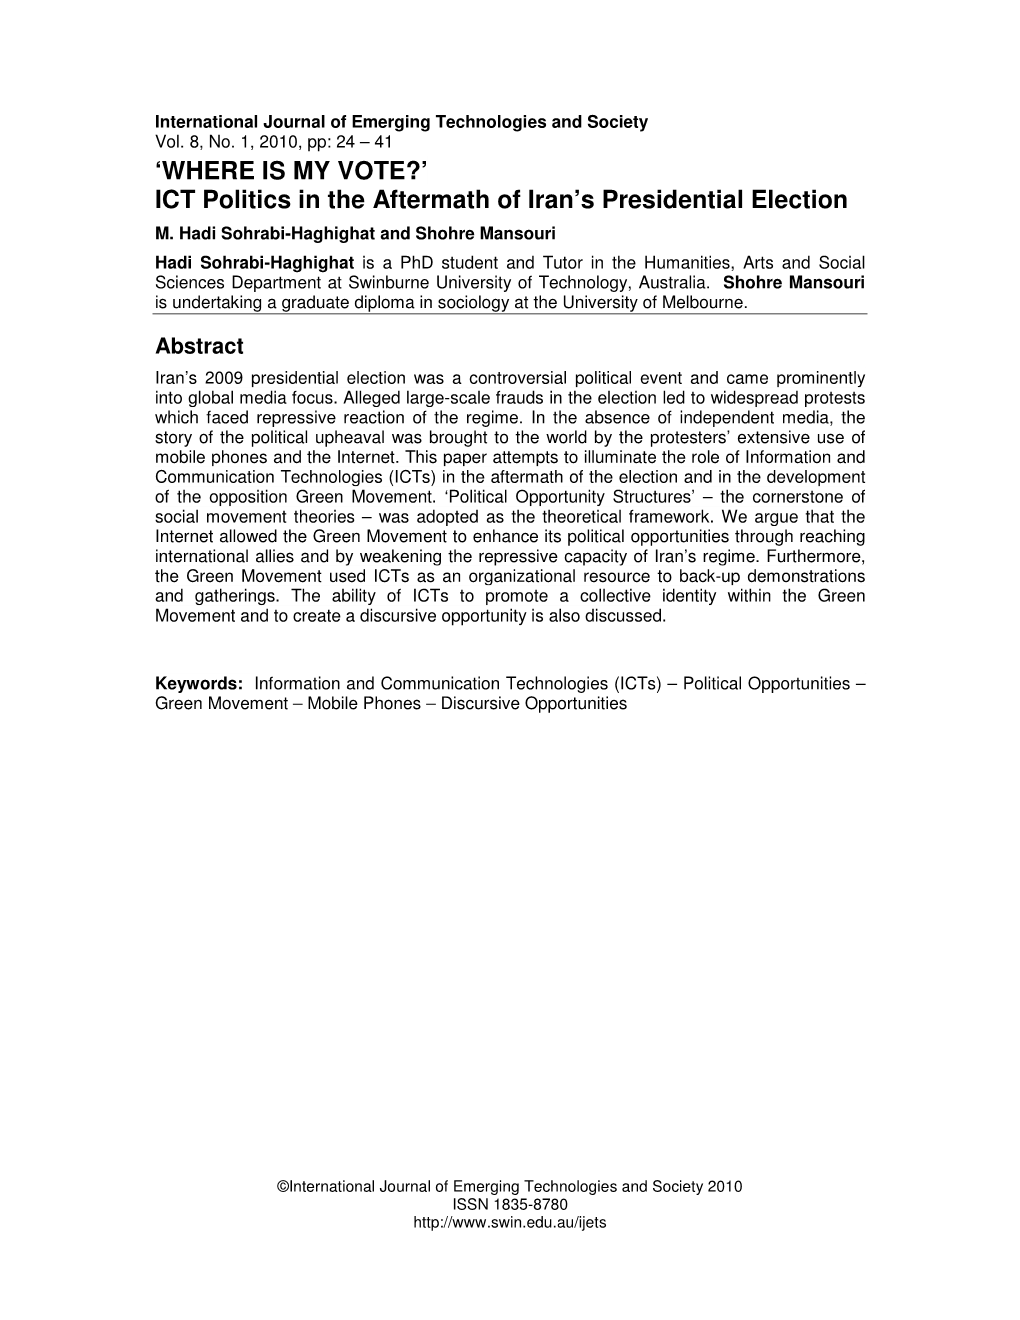 WHERE IS MY VOTE?’ ICT Politics in the Aftermath of Iran’S Presidential Election M